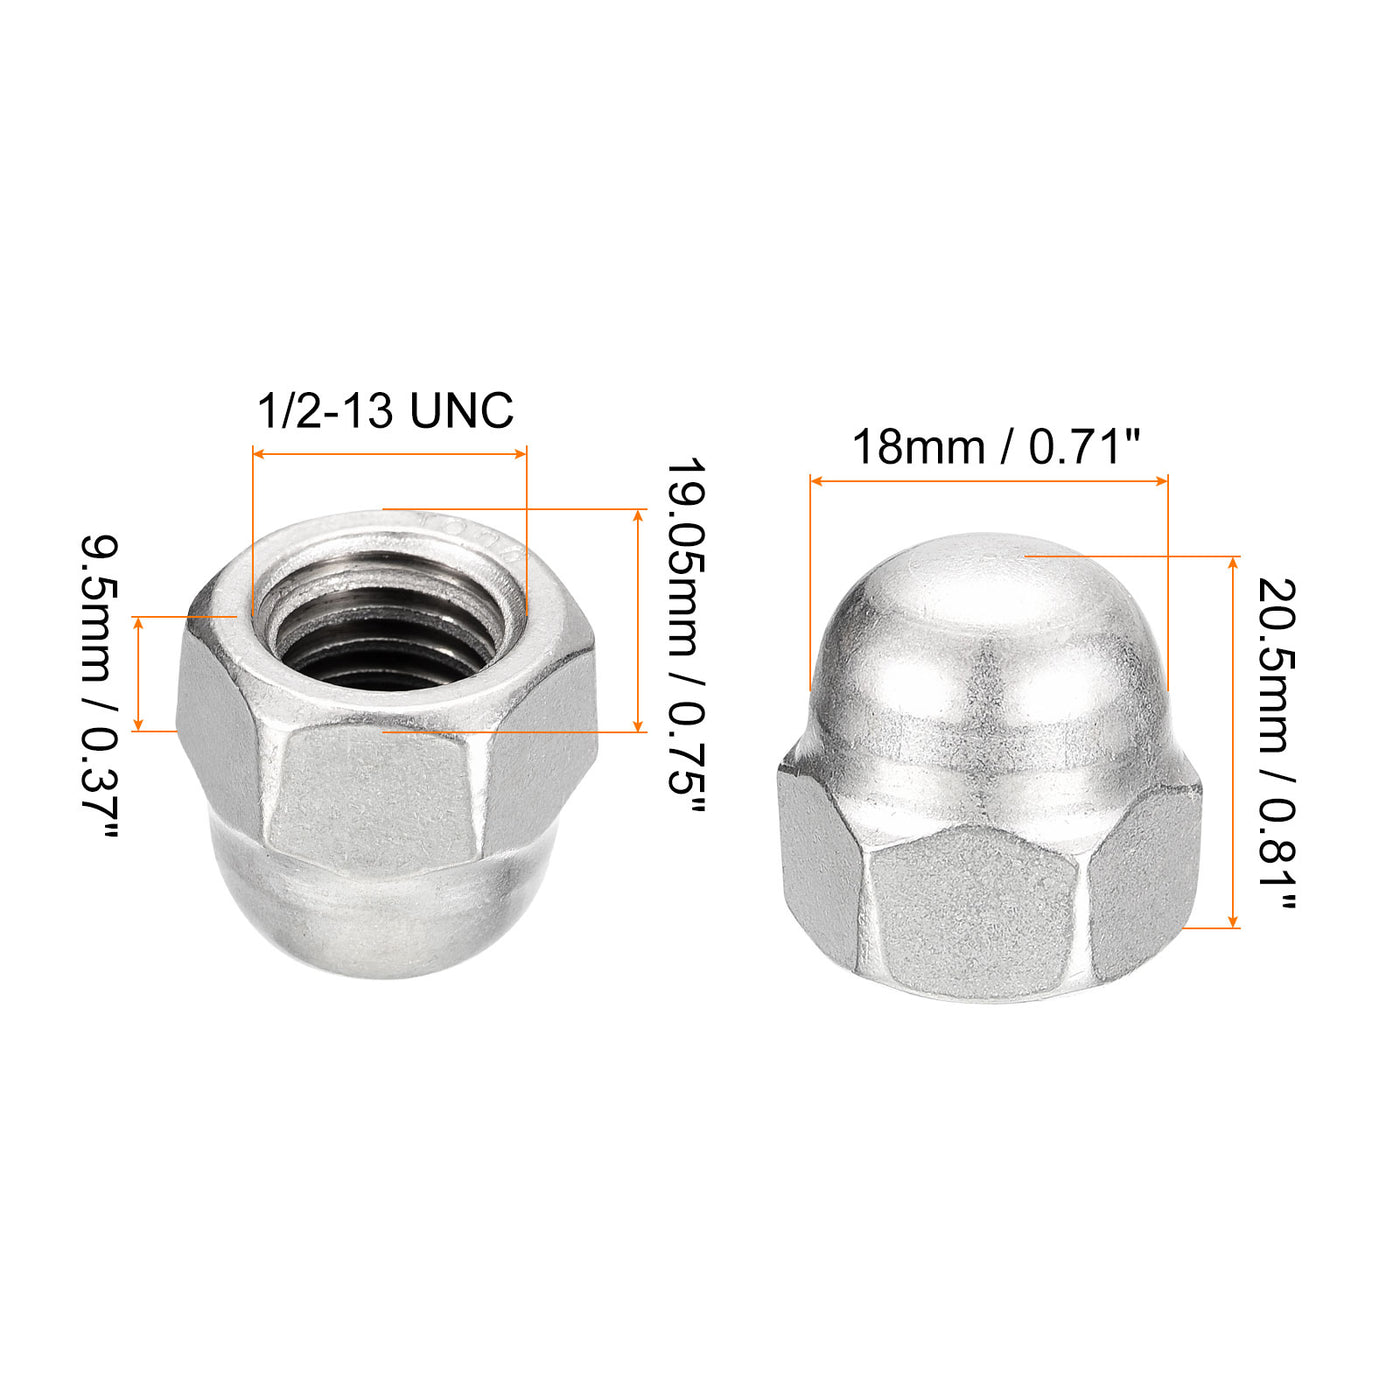 uxcell Uxcell 1/2-13 Acorn Cap Nuts,25pcs - 304 Stainless Steel Hardware Nuts, Acorn Hex Cap Dome Head Nuts for Fasteners (Silver)